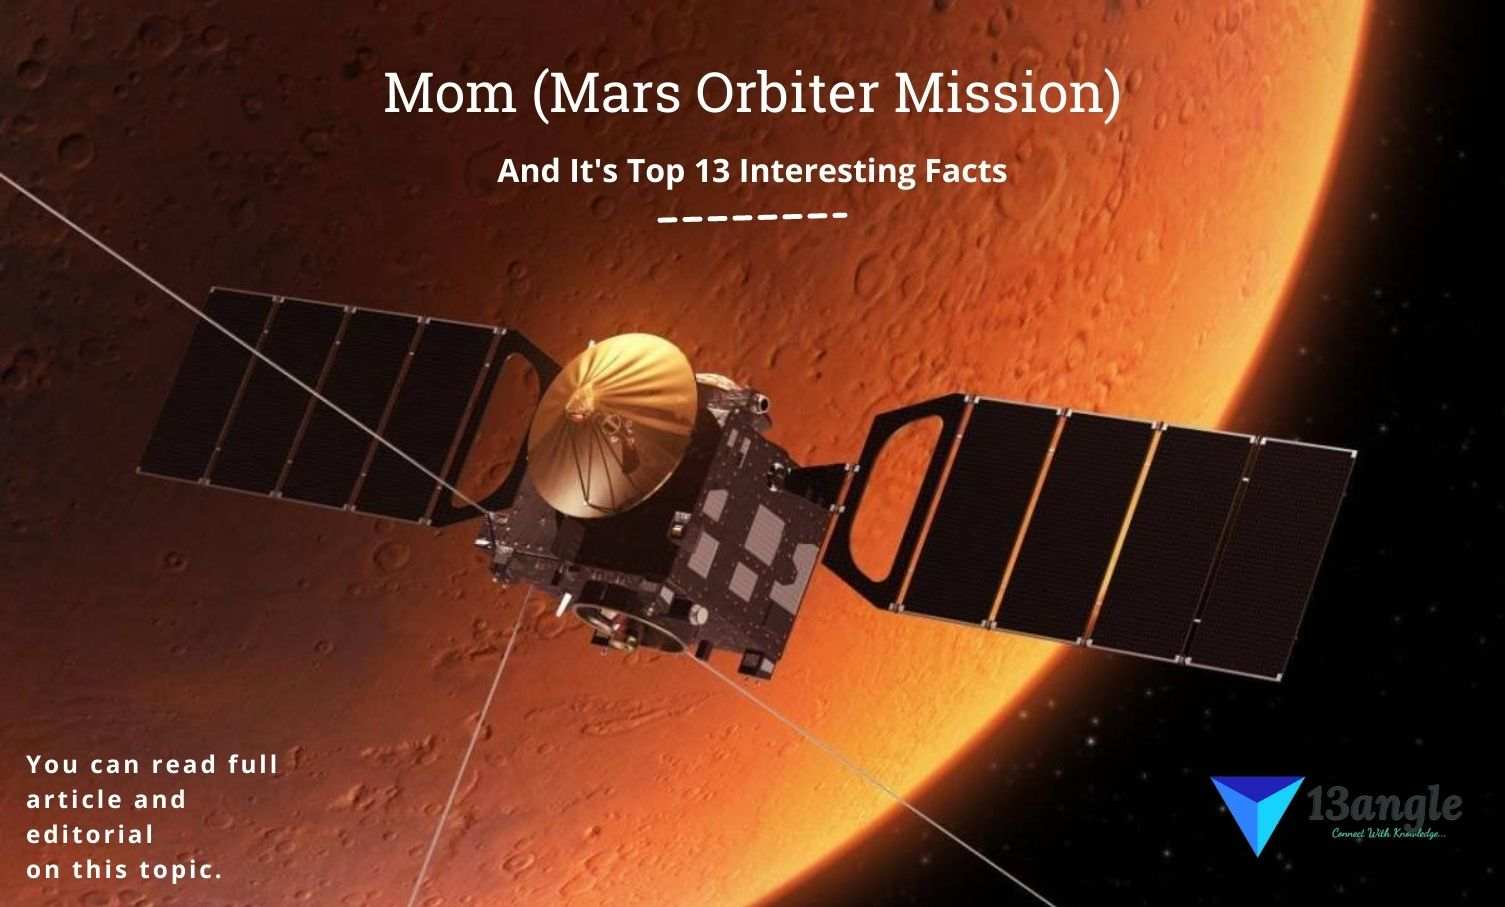 Mom (Mars Orbiter Mission) And It's Top 13 Interesting Facts- 13angle.com